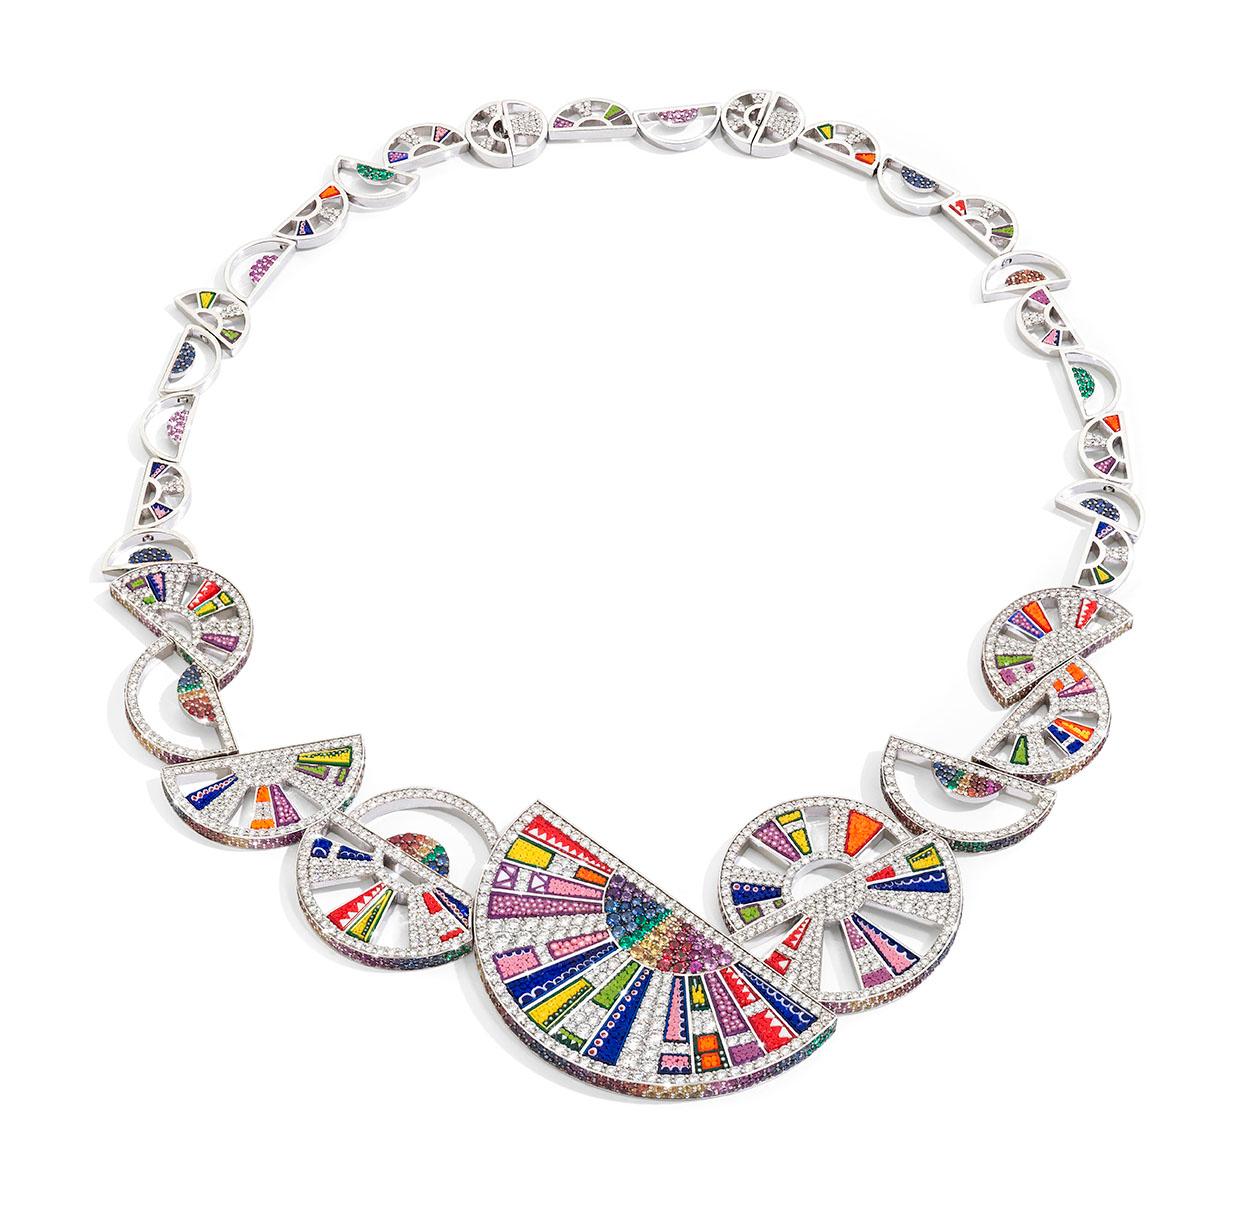 Description

It's a bright rainbow, new colour geometries, vibrant nuances that capture and amplify the stones' natural glow, and millimetre-sized micromosaic tesserae.